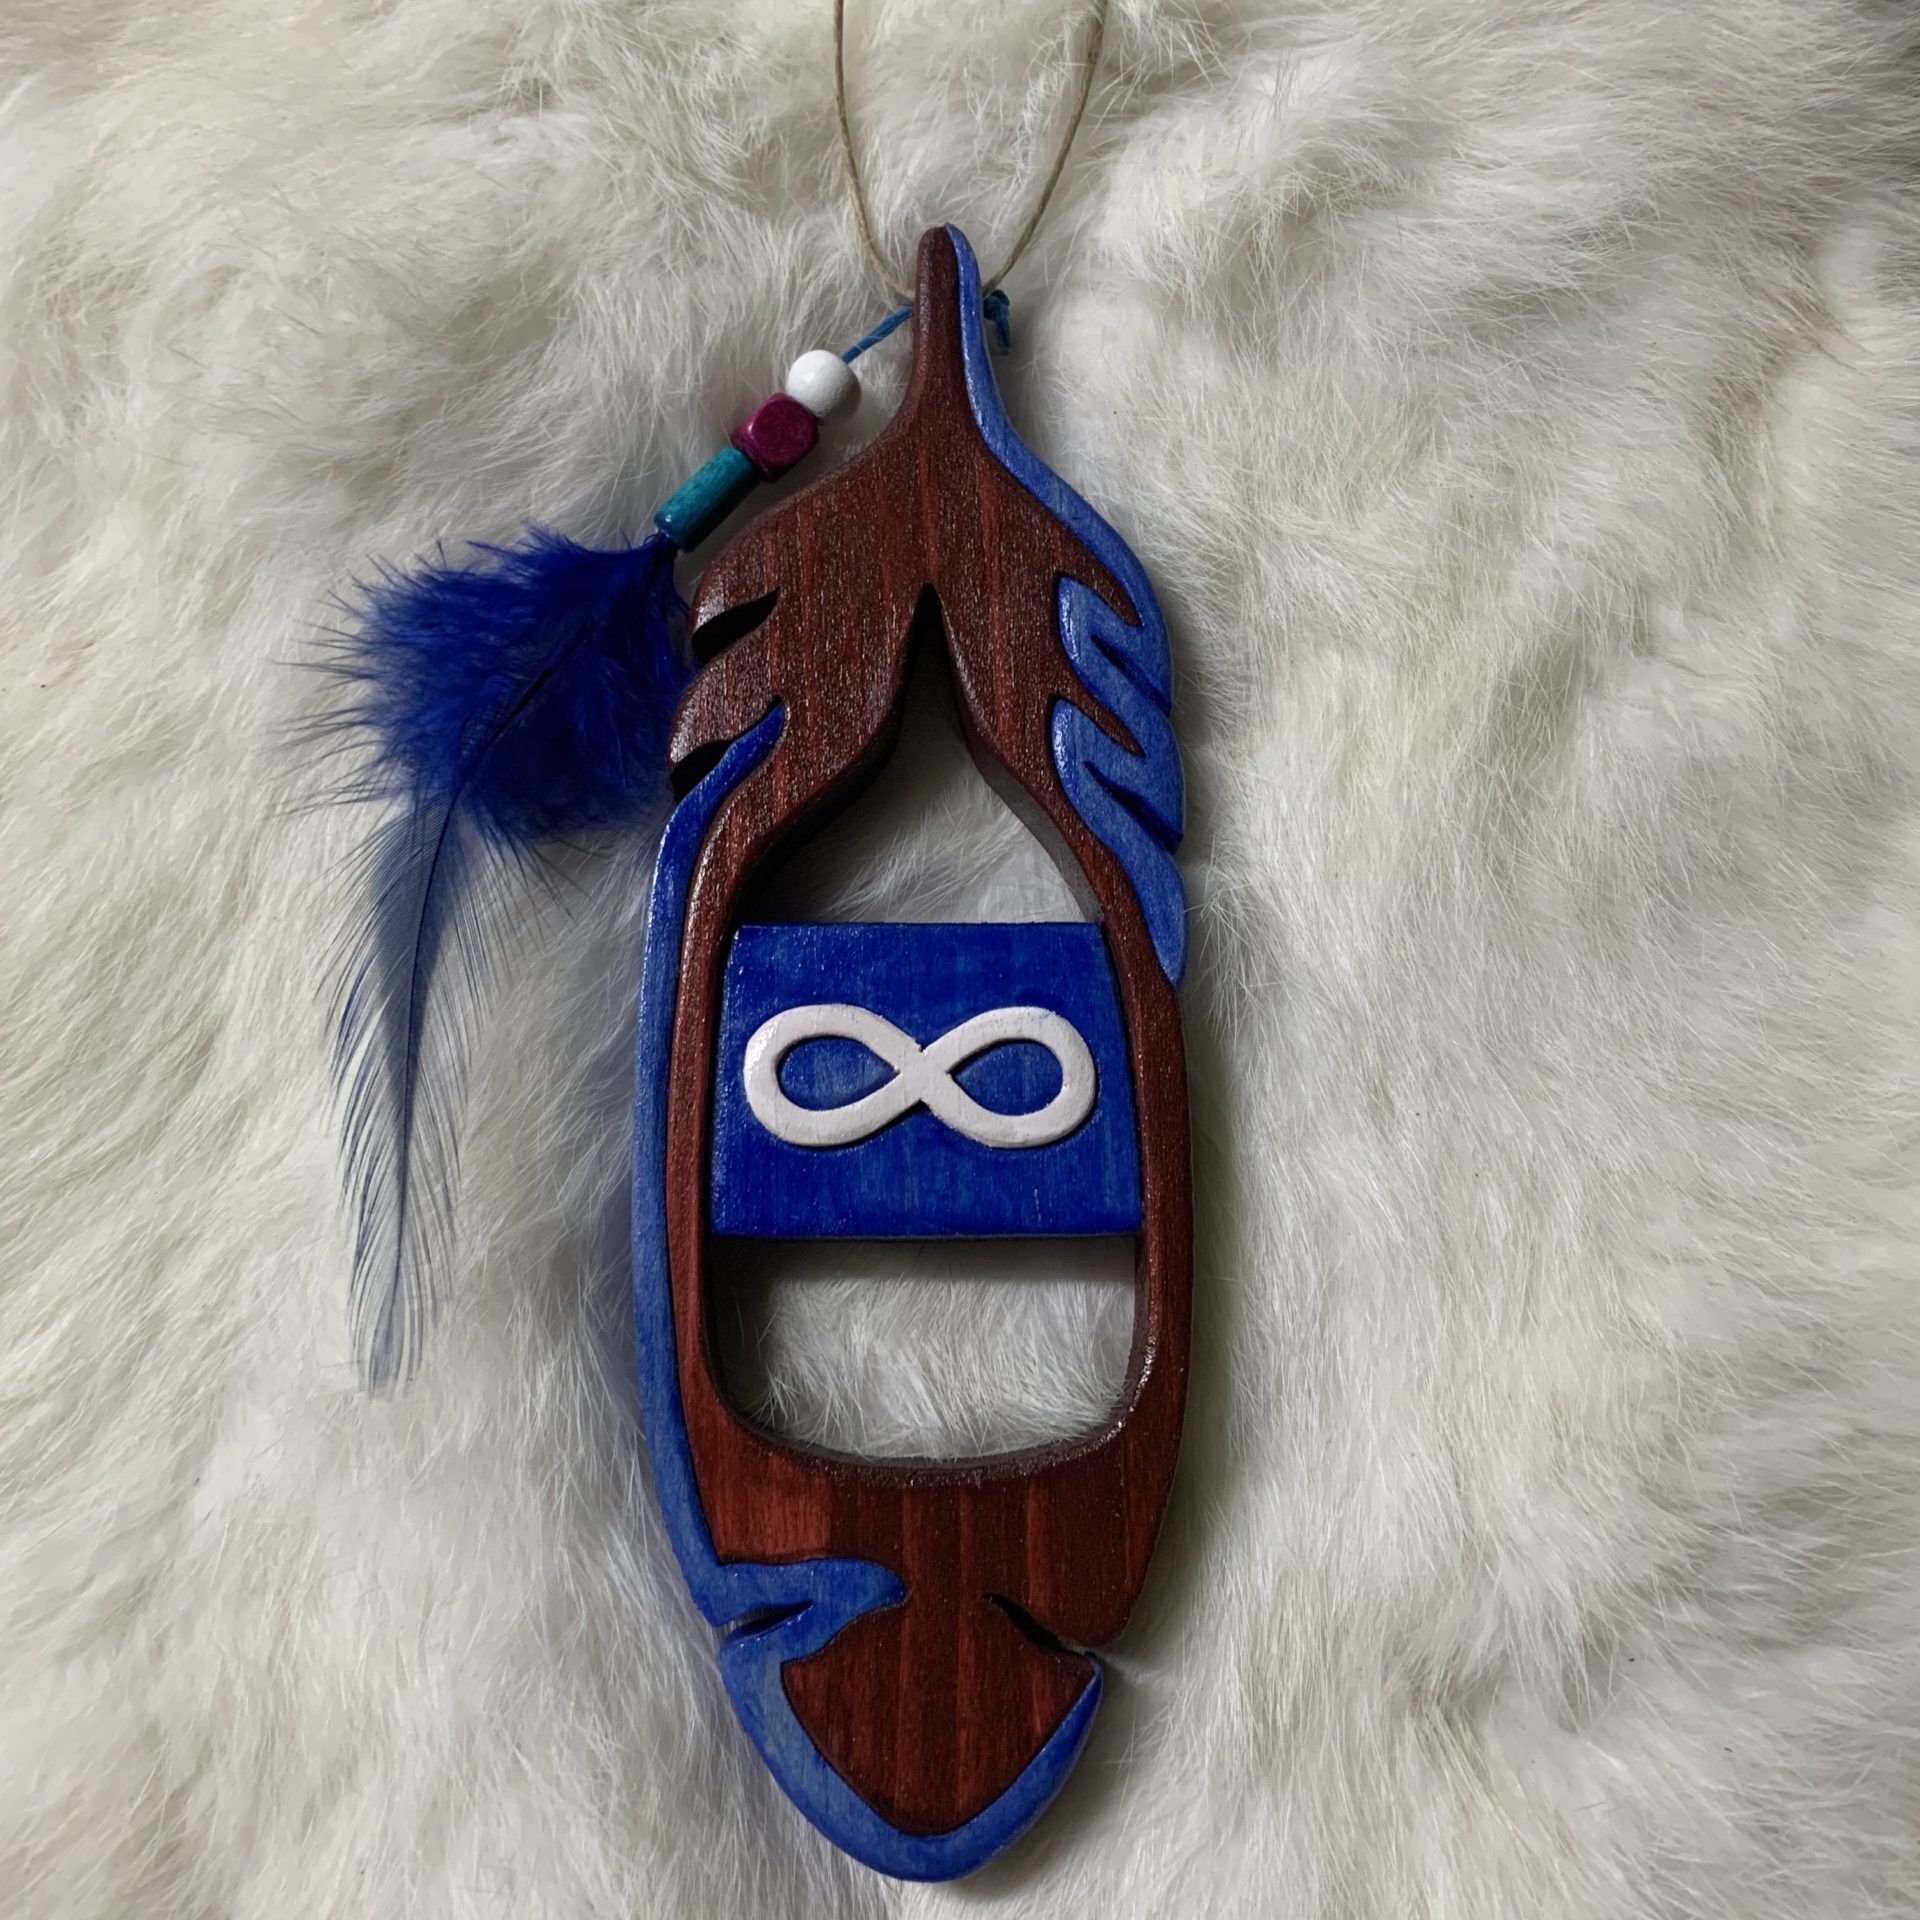 Jean Verdon, woodworking, dreamcatchers, feathers, Indigenous Artist, First Nations, Indigenous Arts Collective of Canada, Pass The Feather